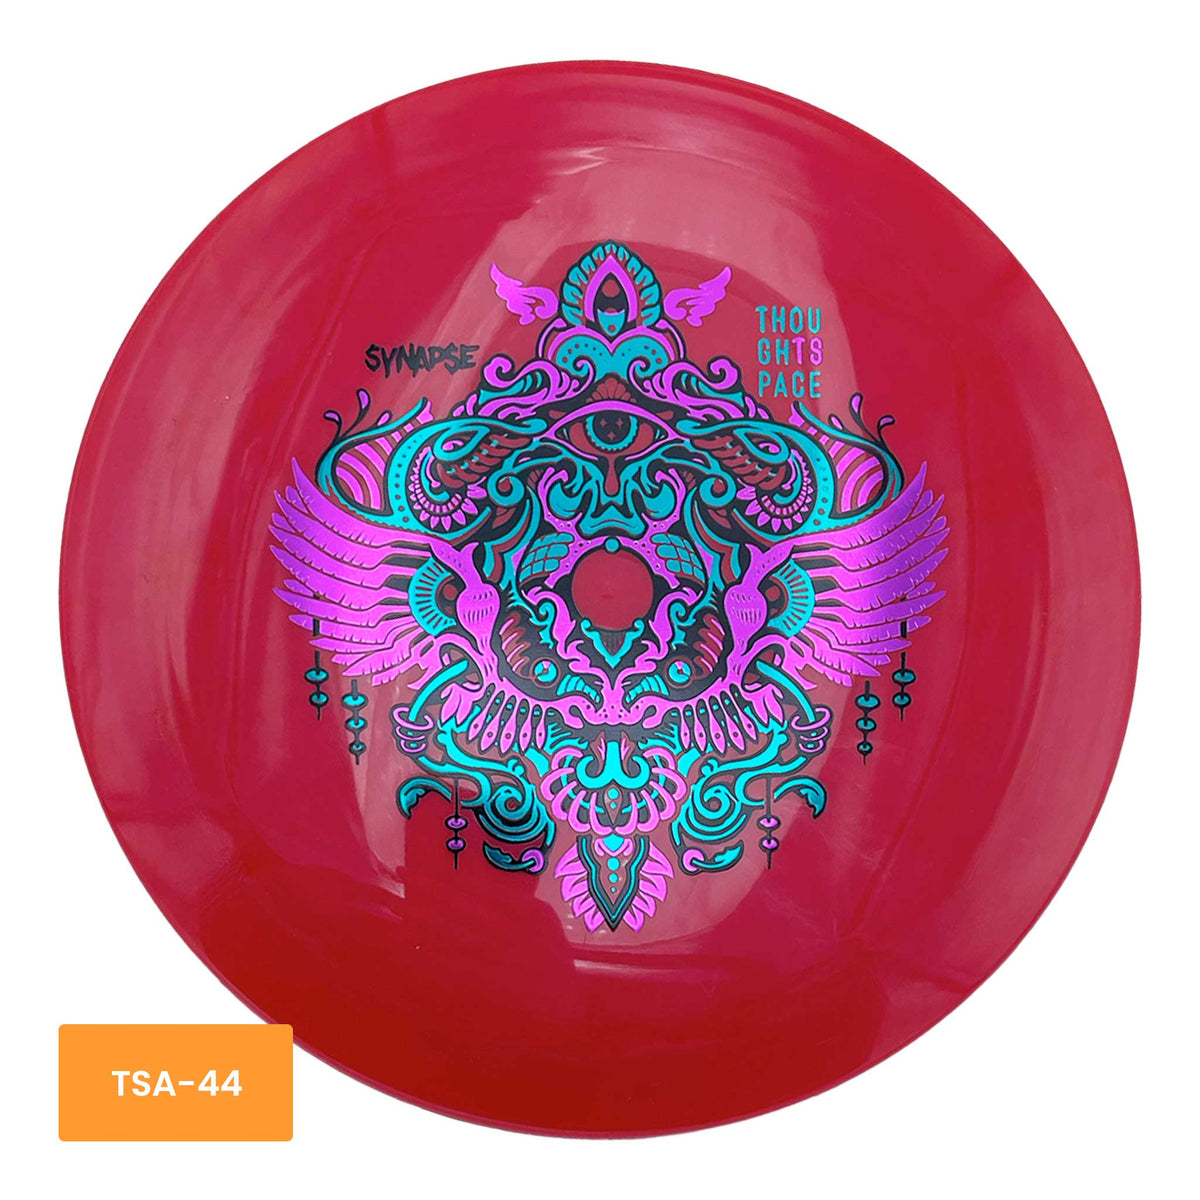 Thought Space Athletics Ethereal Synapse driver - Red